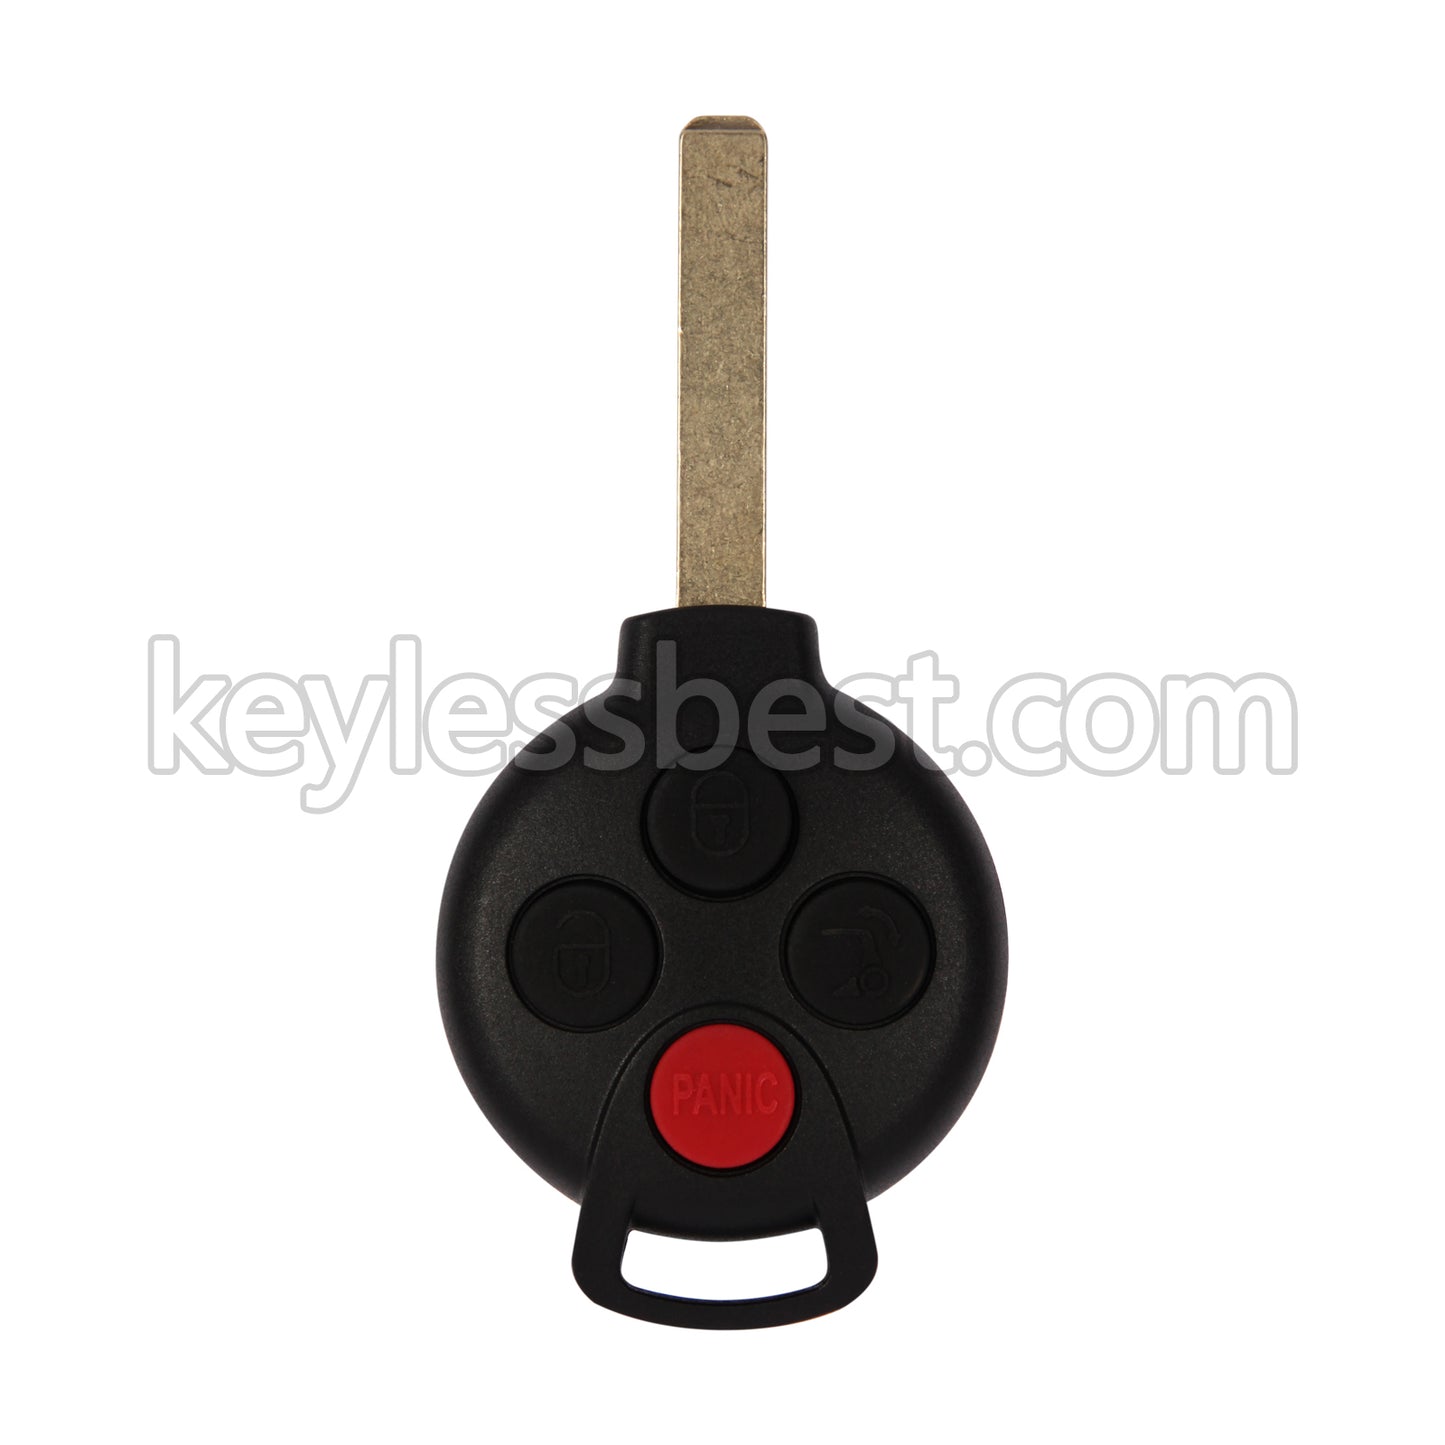 2008 - 2015 Mercedes-Benz Smart Fortwo / 4 Buttons Remote Key / KR55WK45144 / 315MHz